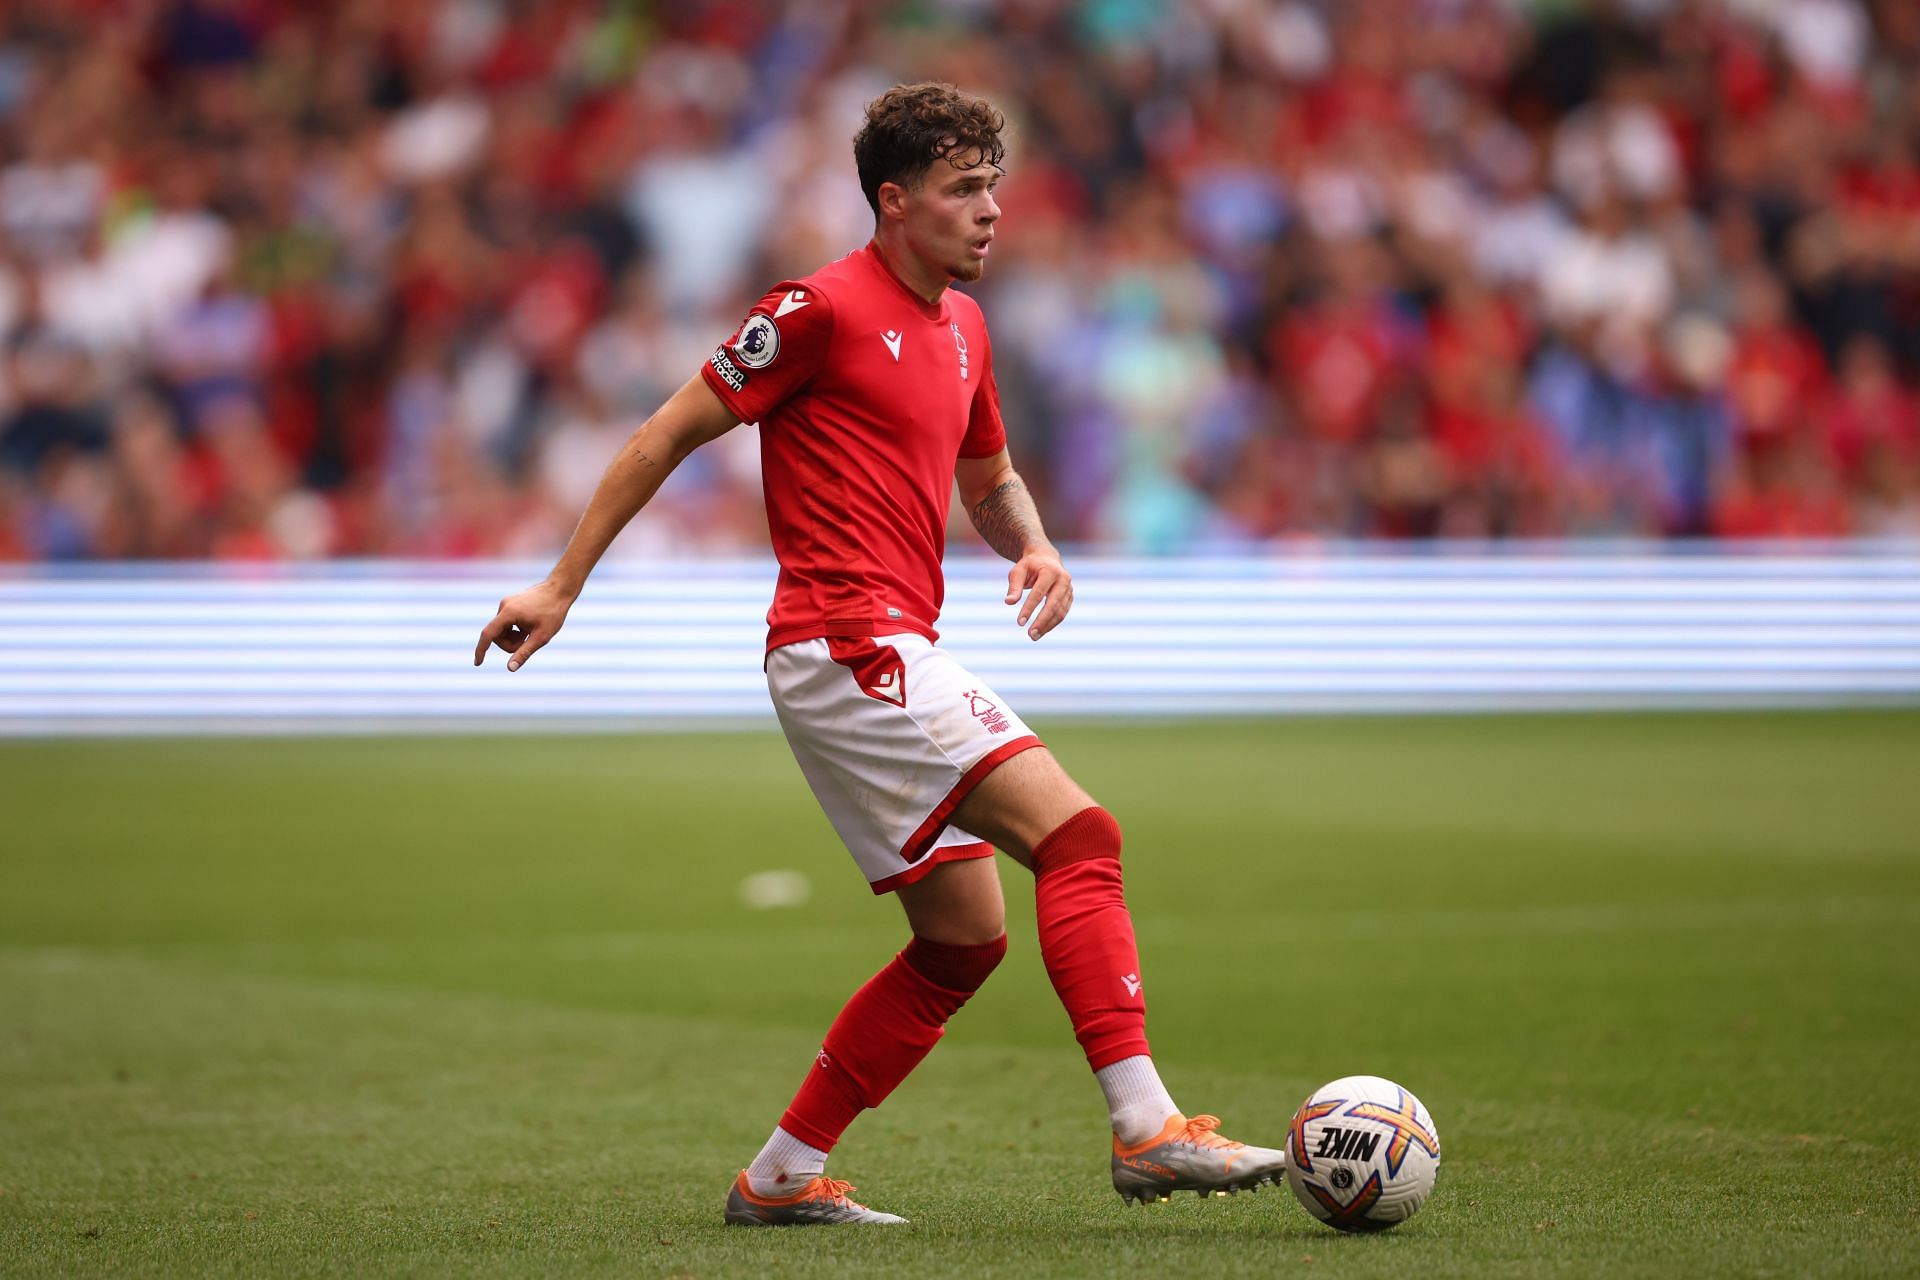 Neco Williams started his Nottingham Forest career brilliantly